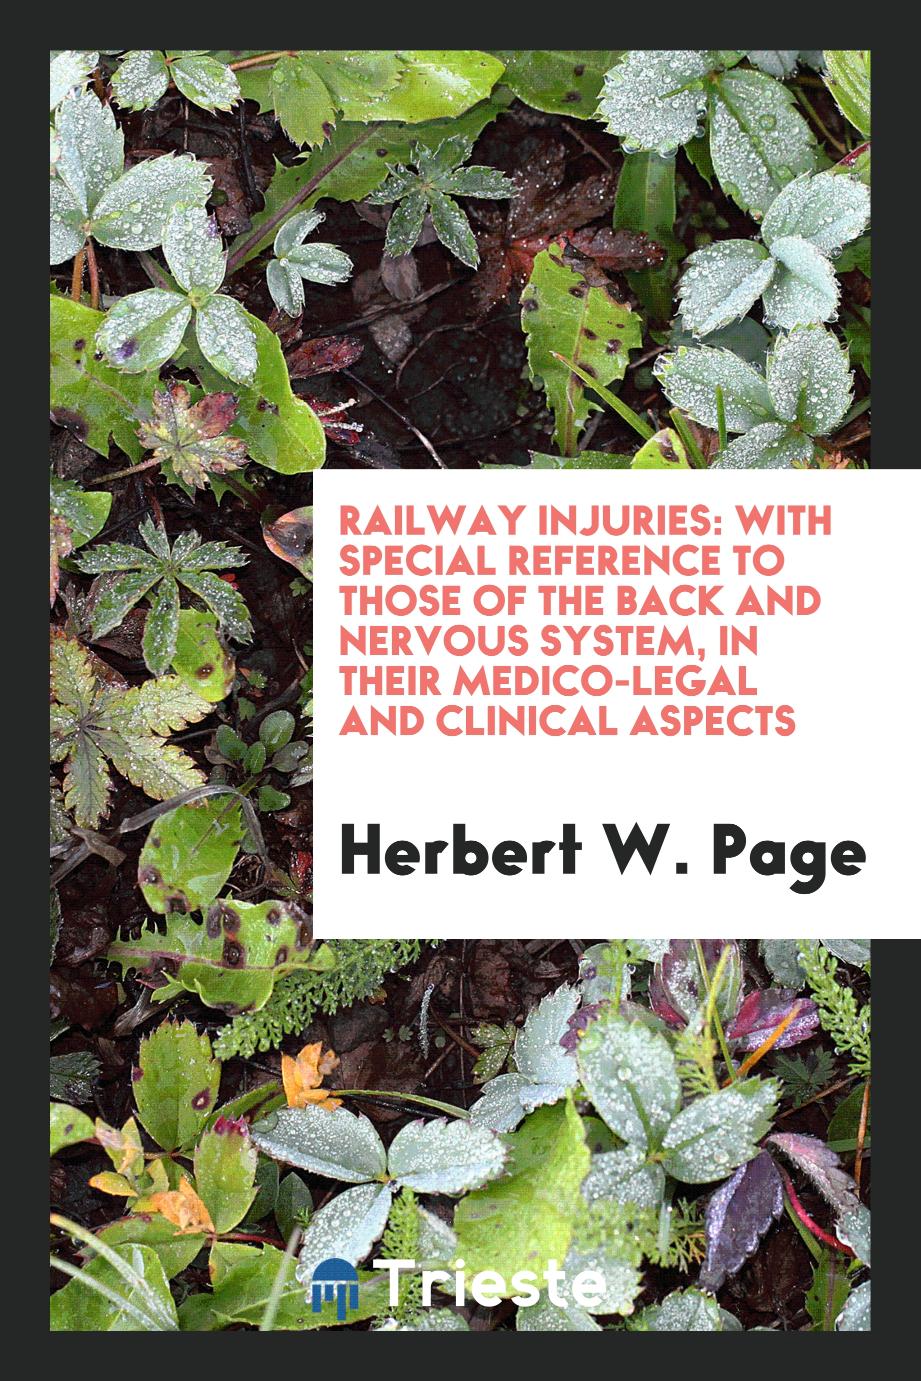 Railway Injuries: With Special Reference to Those of the Back and Nervous System, in Their Medico-Legal and Clinical Aspects